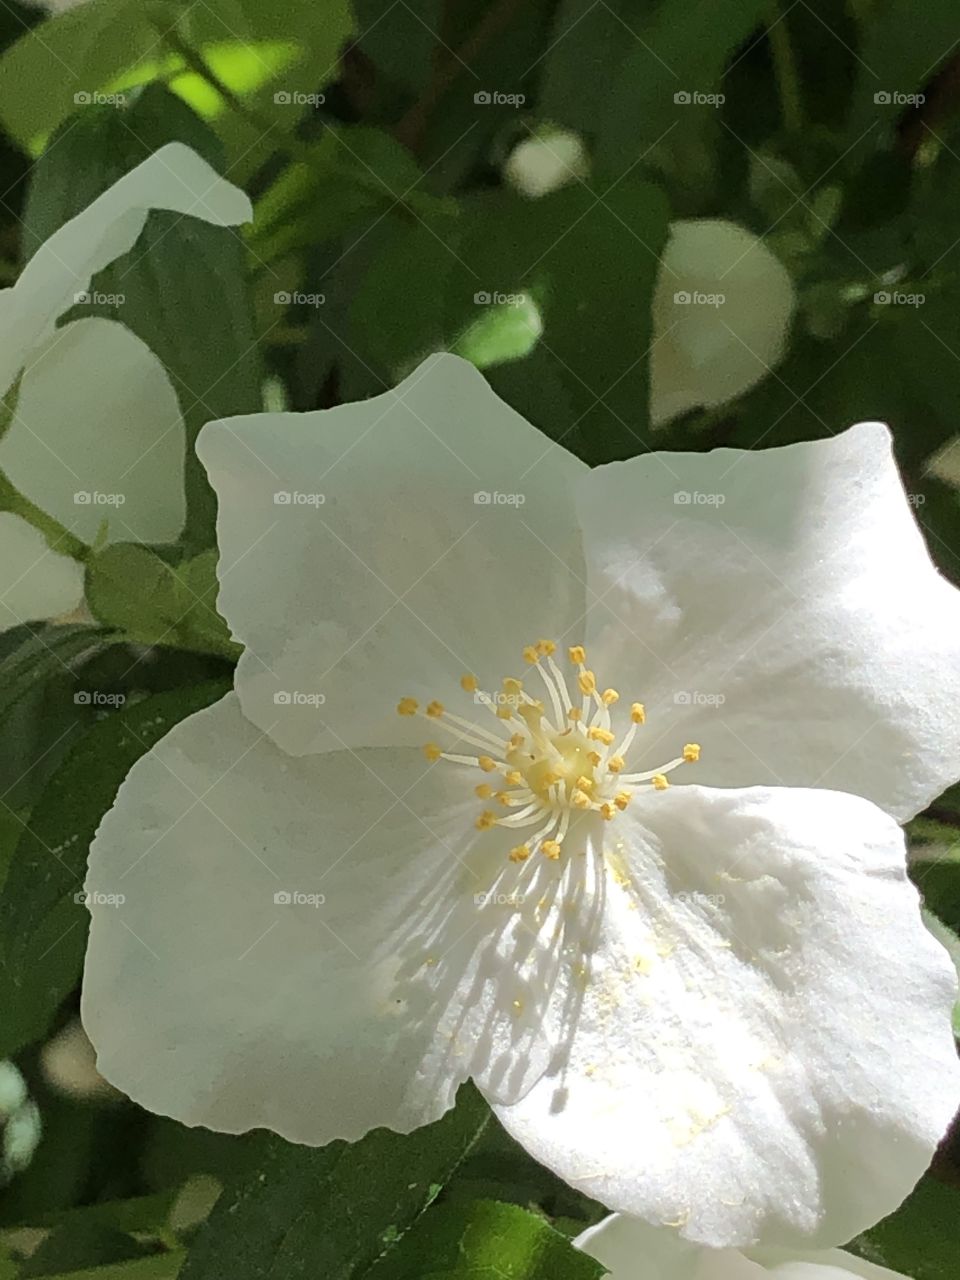 White petals on a flower